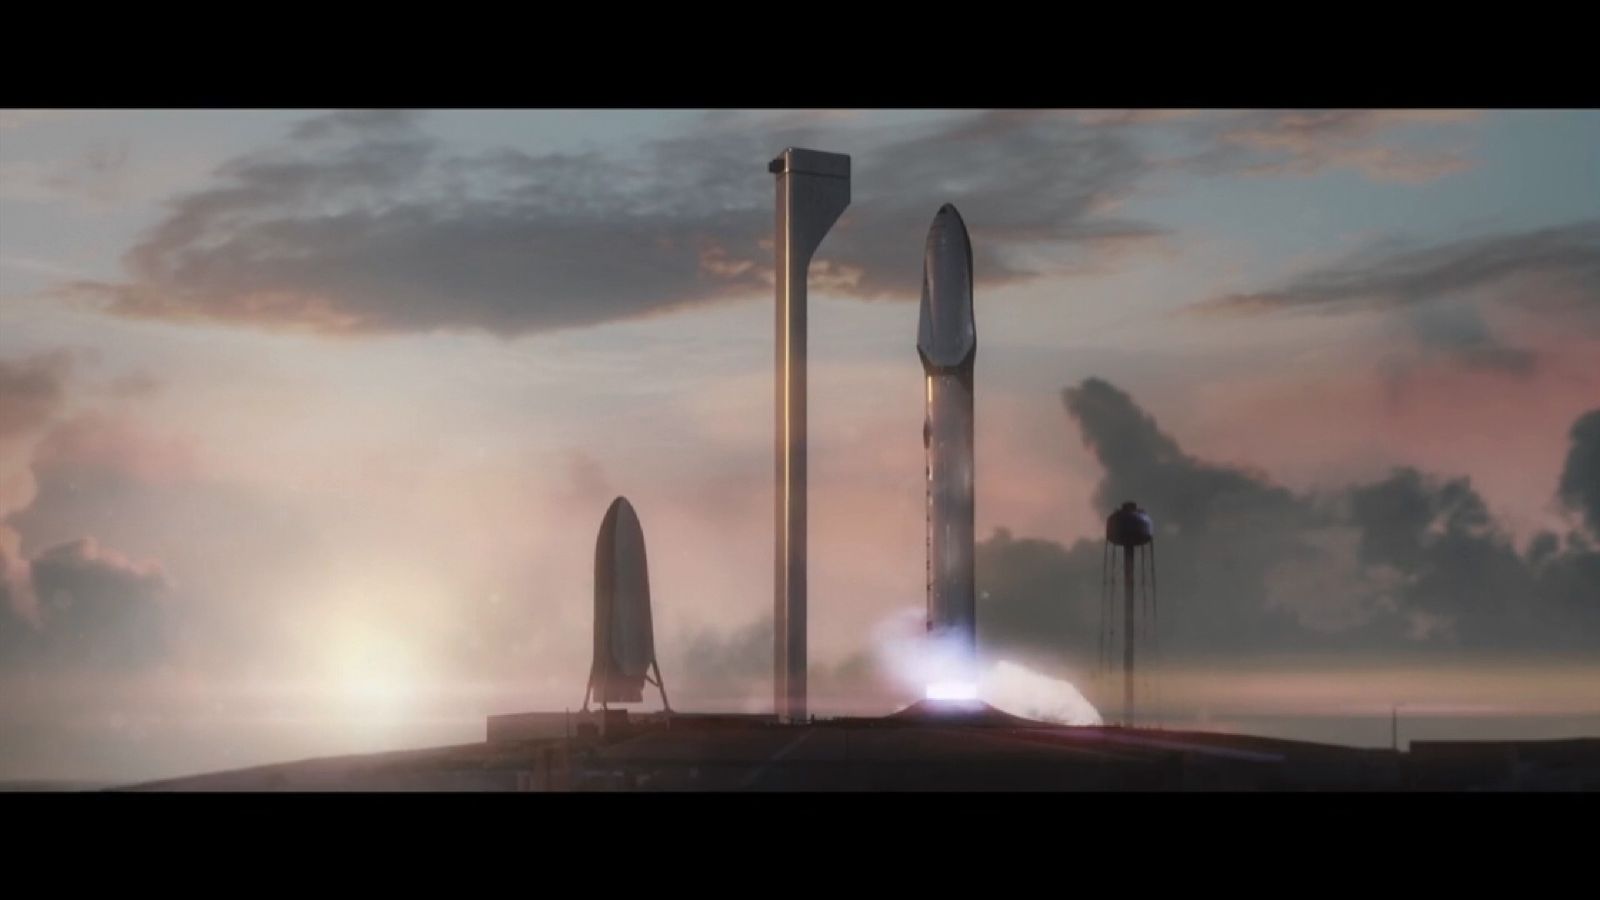 Elon Musk unveils plan to build city on Mars 'in our lifetimes